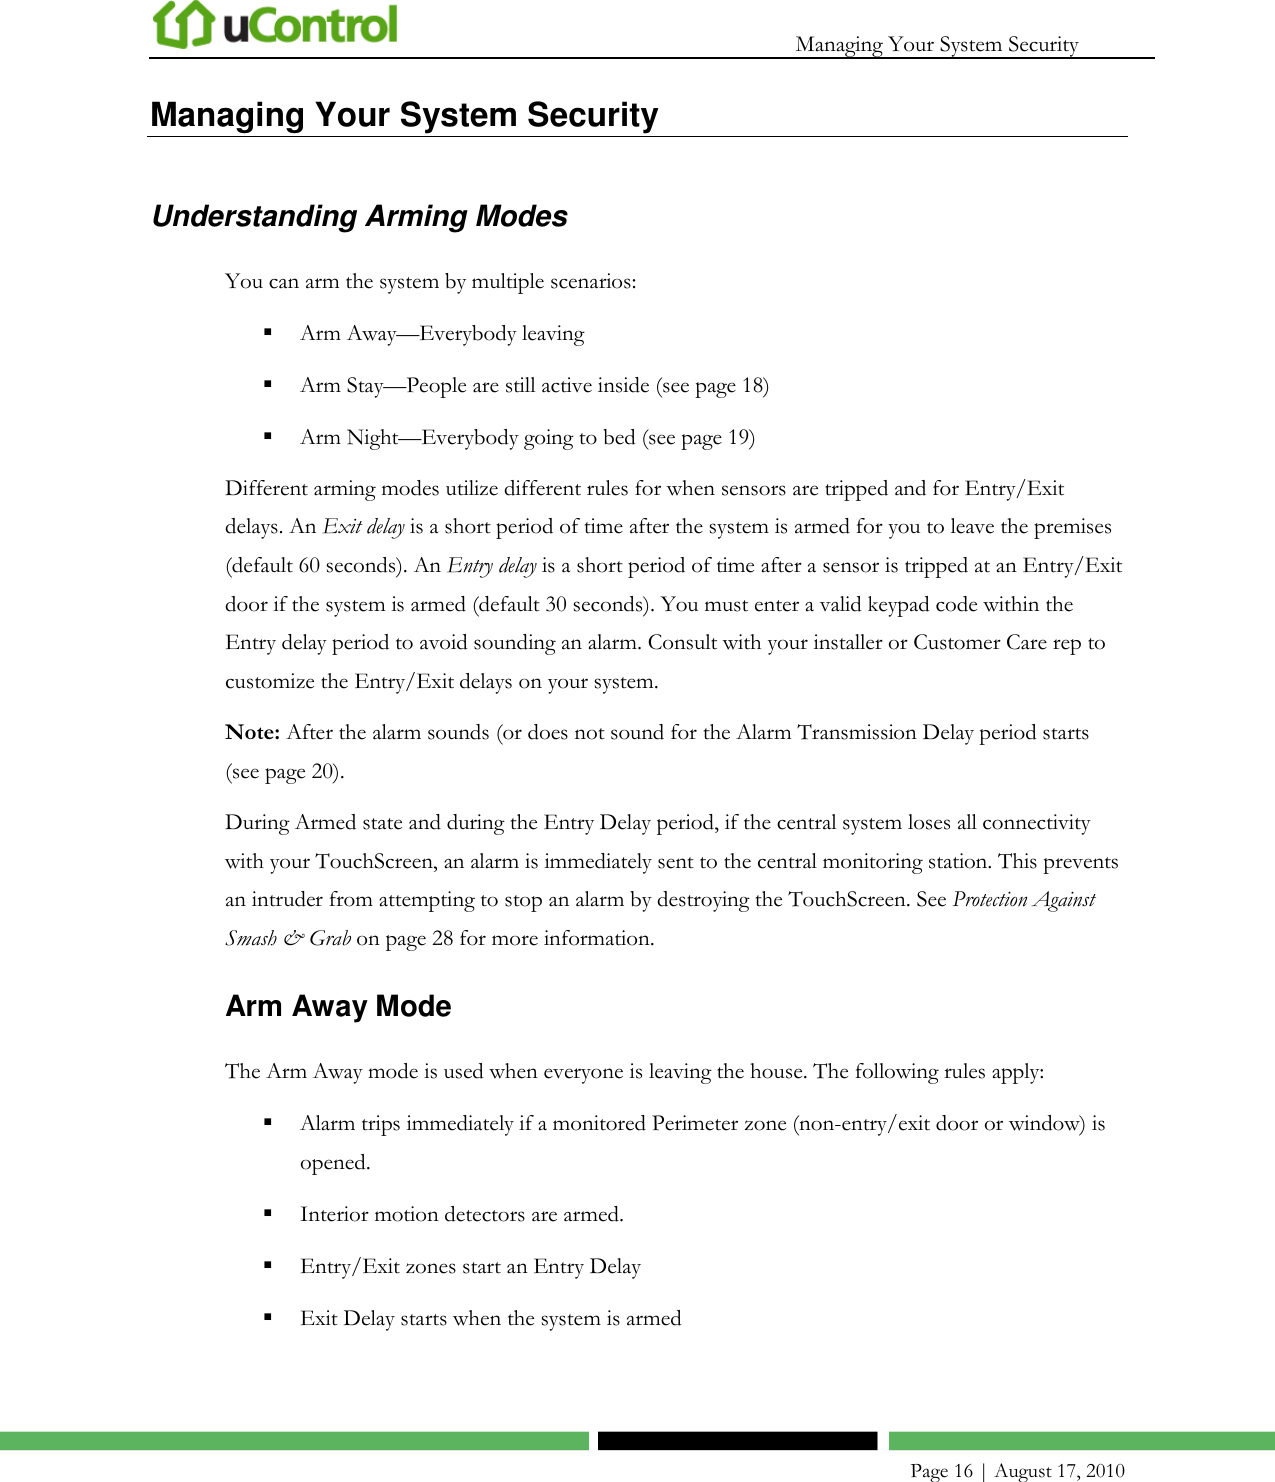   Managing Your System Security    Page 16 | August 17, 2010 Managing Your System Security Understanding Arming Modes You can arm the system by multiple scenarios:  Arm Away—Everybody leaving   Arm Stay—People are still active inside (see page 18)  Arm Night—Everybody going to bed (see page 19) Different arming modes utilize different rules for when sensors are tripped and for Entry/Exit delays. An Exit delay is a short period of time after the system is armed for you to leave the premises (default 60 seconds). An Entry delay is a short period of time after a sensor is tripped at an Entry/Exit door if the system is armed (default 30 seconds). You must enter a valid keypad code within the Entry delay period to avoid sounding an alarm. Consult with your installer or Customer Care rep to customize the Entry/Exit delays on your system.   Note: After the alarm sounds (or does not sound for the Alarm Transmission Delay period starts (see page 20). During Armed state and during the Entry Delay period, if the central system loses all connectivity with your TouchScreen, an alarm is immediately sent to the central monitoring station. This prevents an intruder from attempting to stop an alarm by destroying the TouchScreen. See Protection Against Smash &amp; Grab on page 28 for more information. Arm Away Mode The Arm Away mode is used when everyone is leaving the house. The following rules apply:  Alarm trips immediately if a monitored Perimeter zone (non-entry/exit door or window) is opened.  Interior motion detectors are armed.  Entry/Exit zones start an Entry Delay   Exit Delay starts when the system is armed  